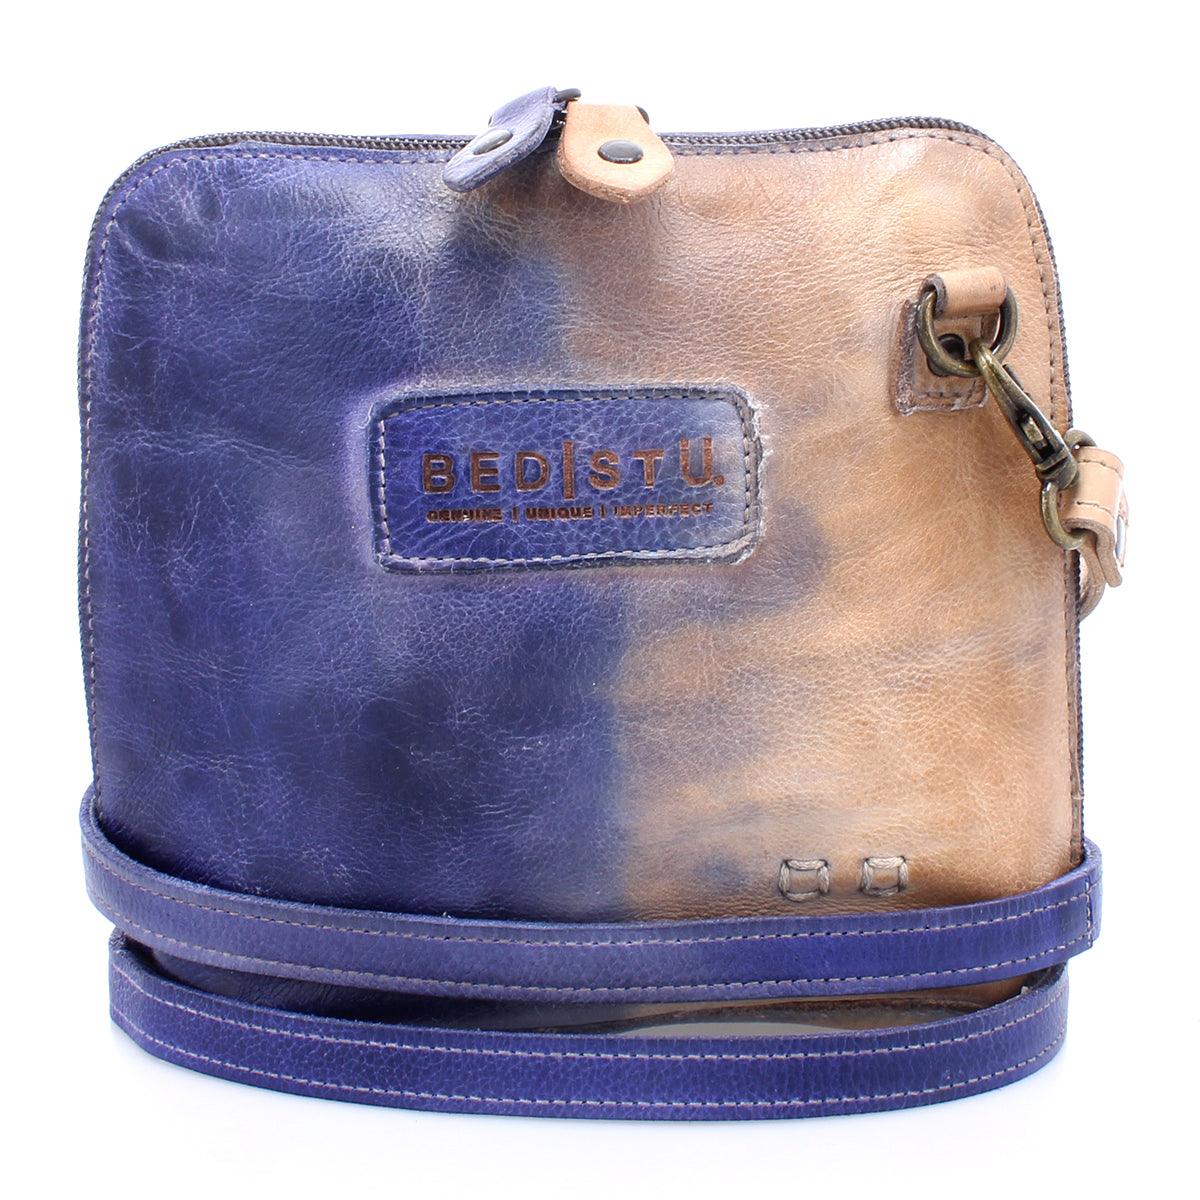 A blue leather Ventura cross body bag by Bed Stu perfect for a Saturday adventure.